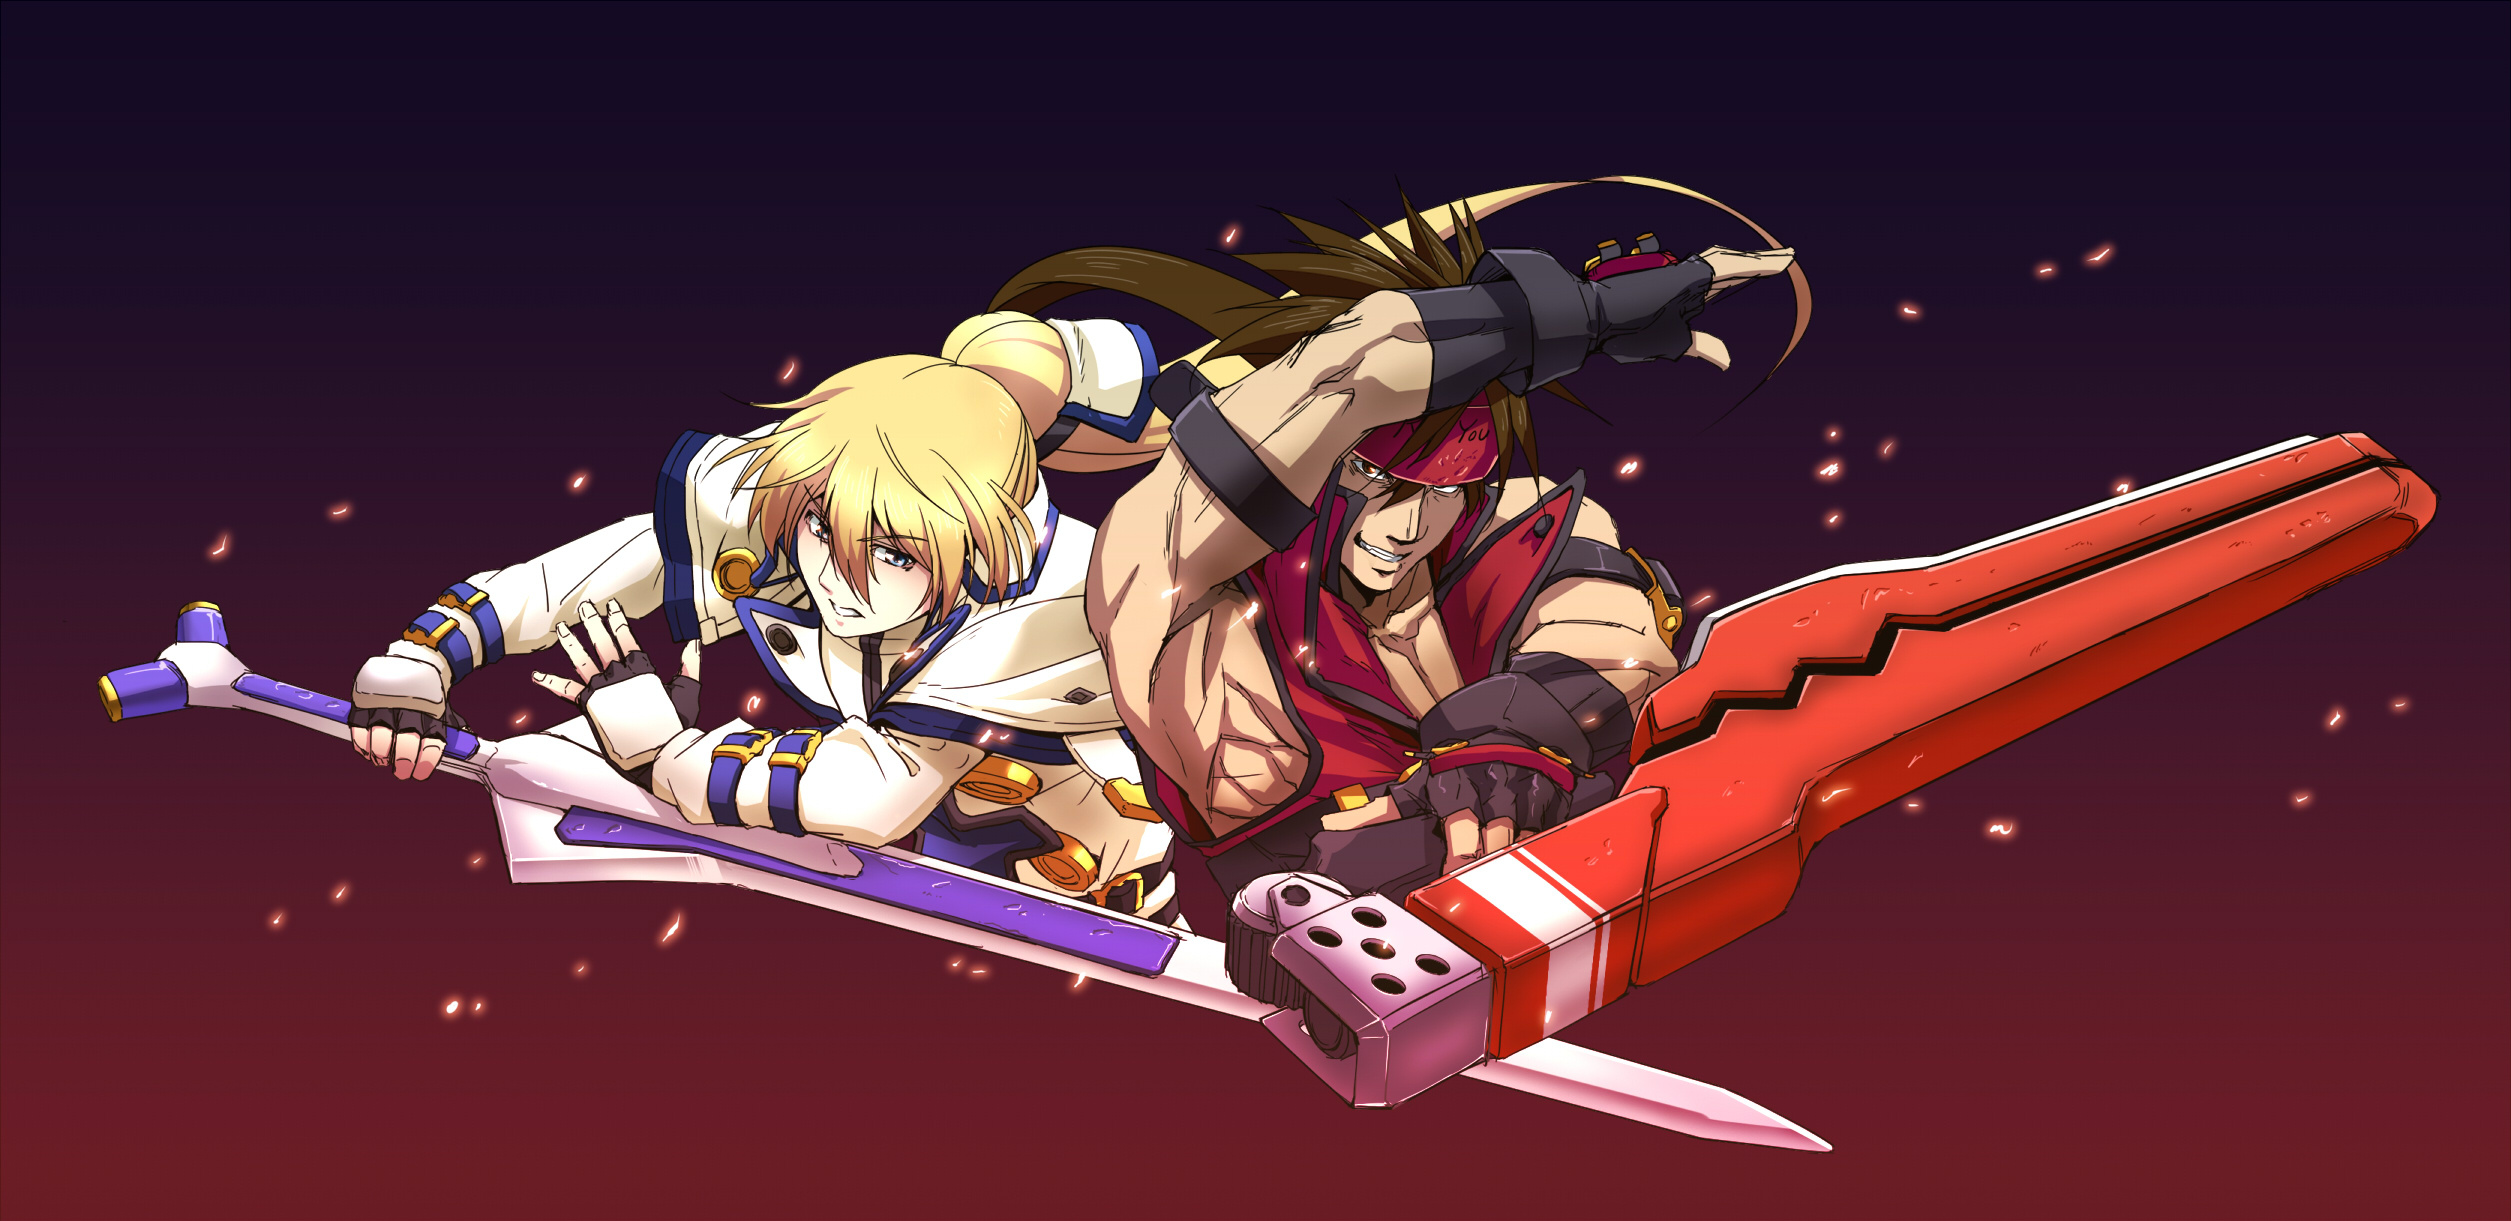 Guilty Gear wallpapers, Anime fighting game, Stylish characters, Intense battles, 2520x1230 Dual Screen Desktop